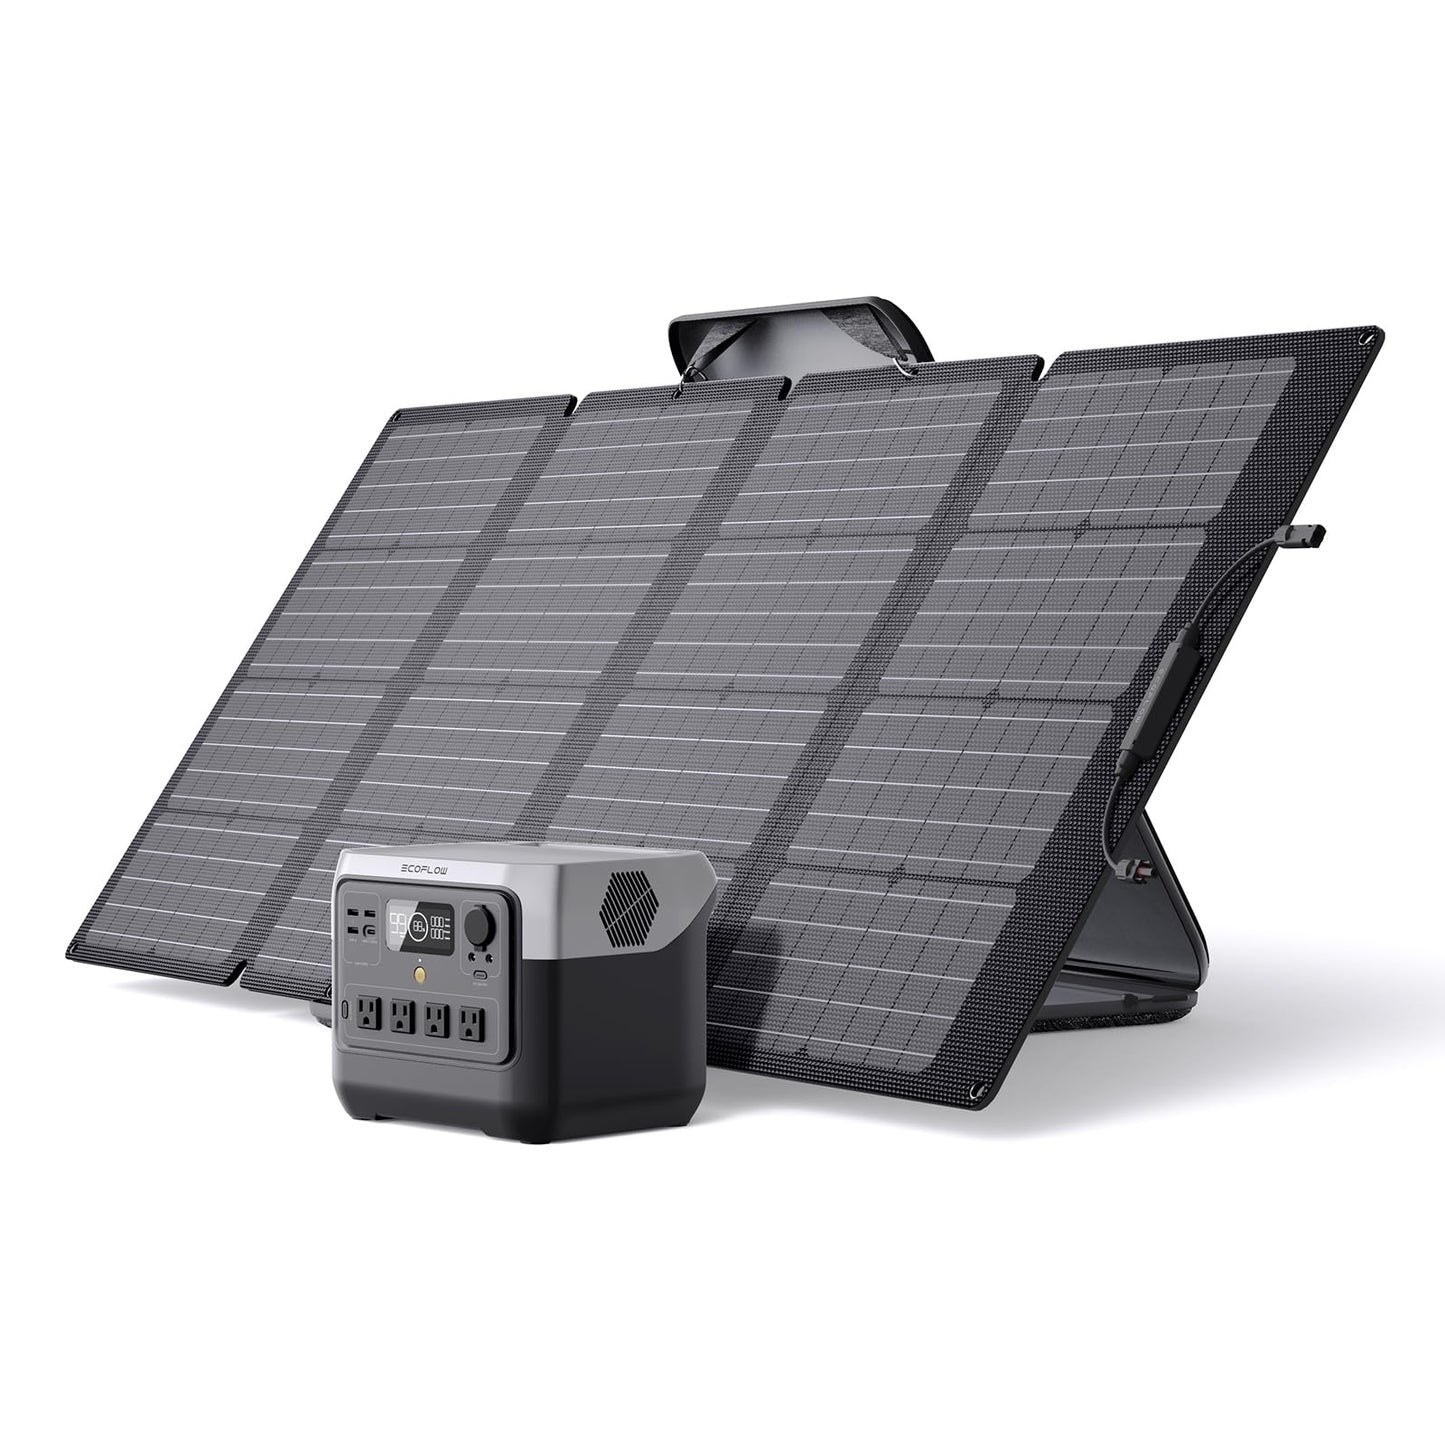 EF ECOFLOW Solar Generator RIVER 2 Pro 768Wh Portable Power Station & 160W Portable Solar Panel LiFePO4 Battery 70 Min Fully Charged, 4×AC, For Camping, RV, Home Backup